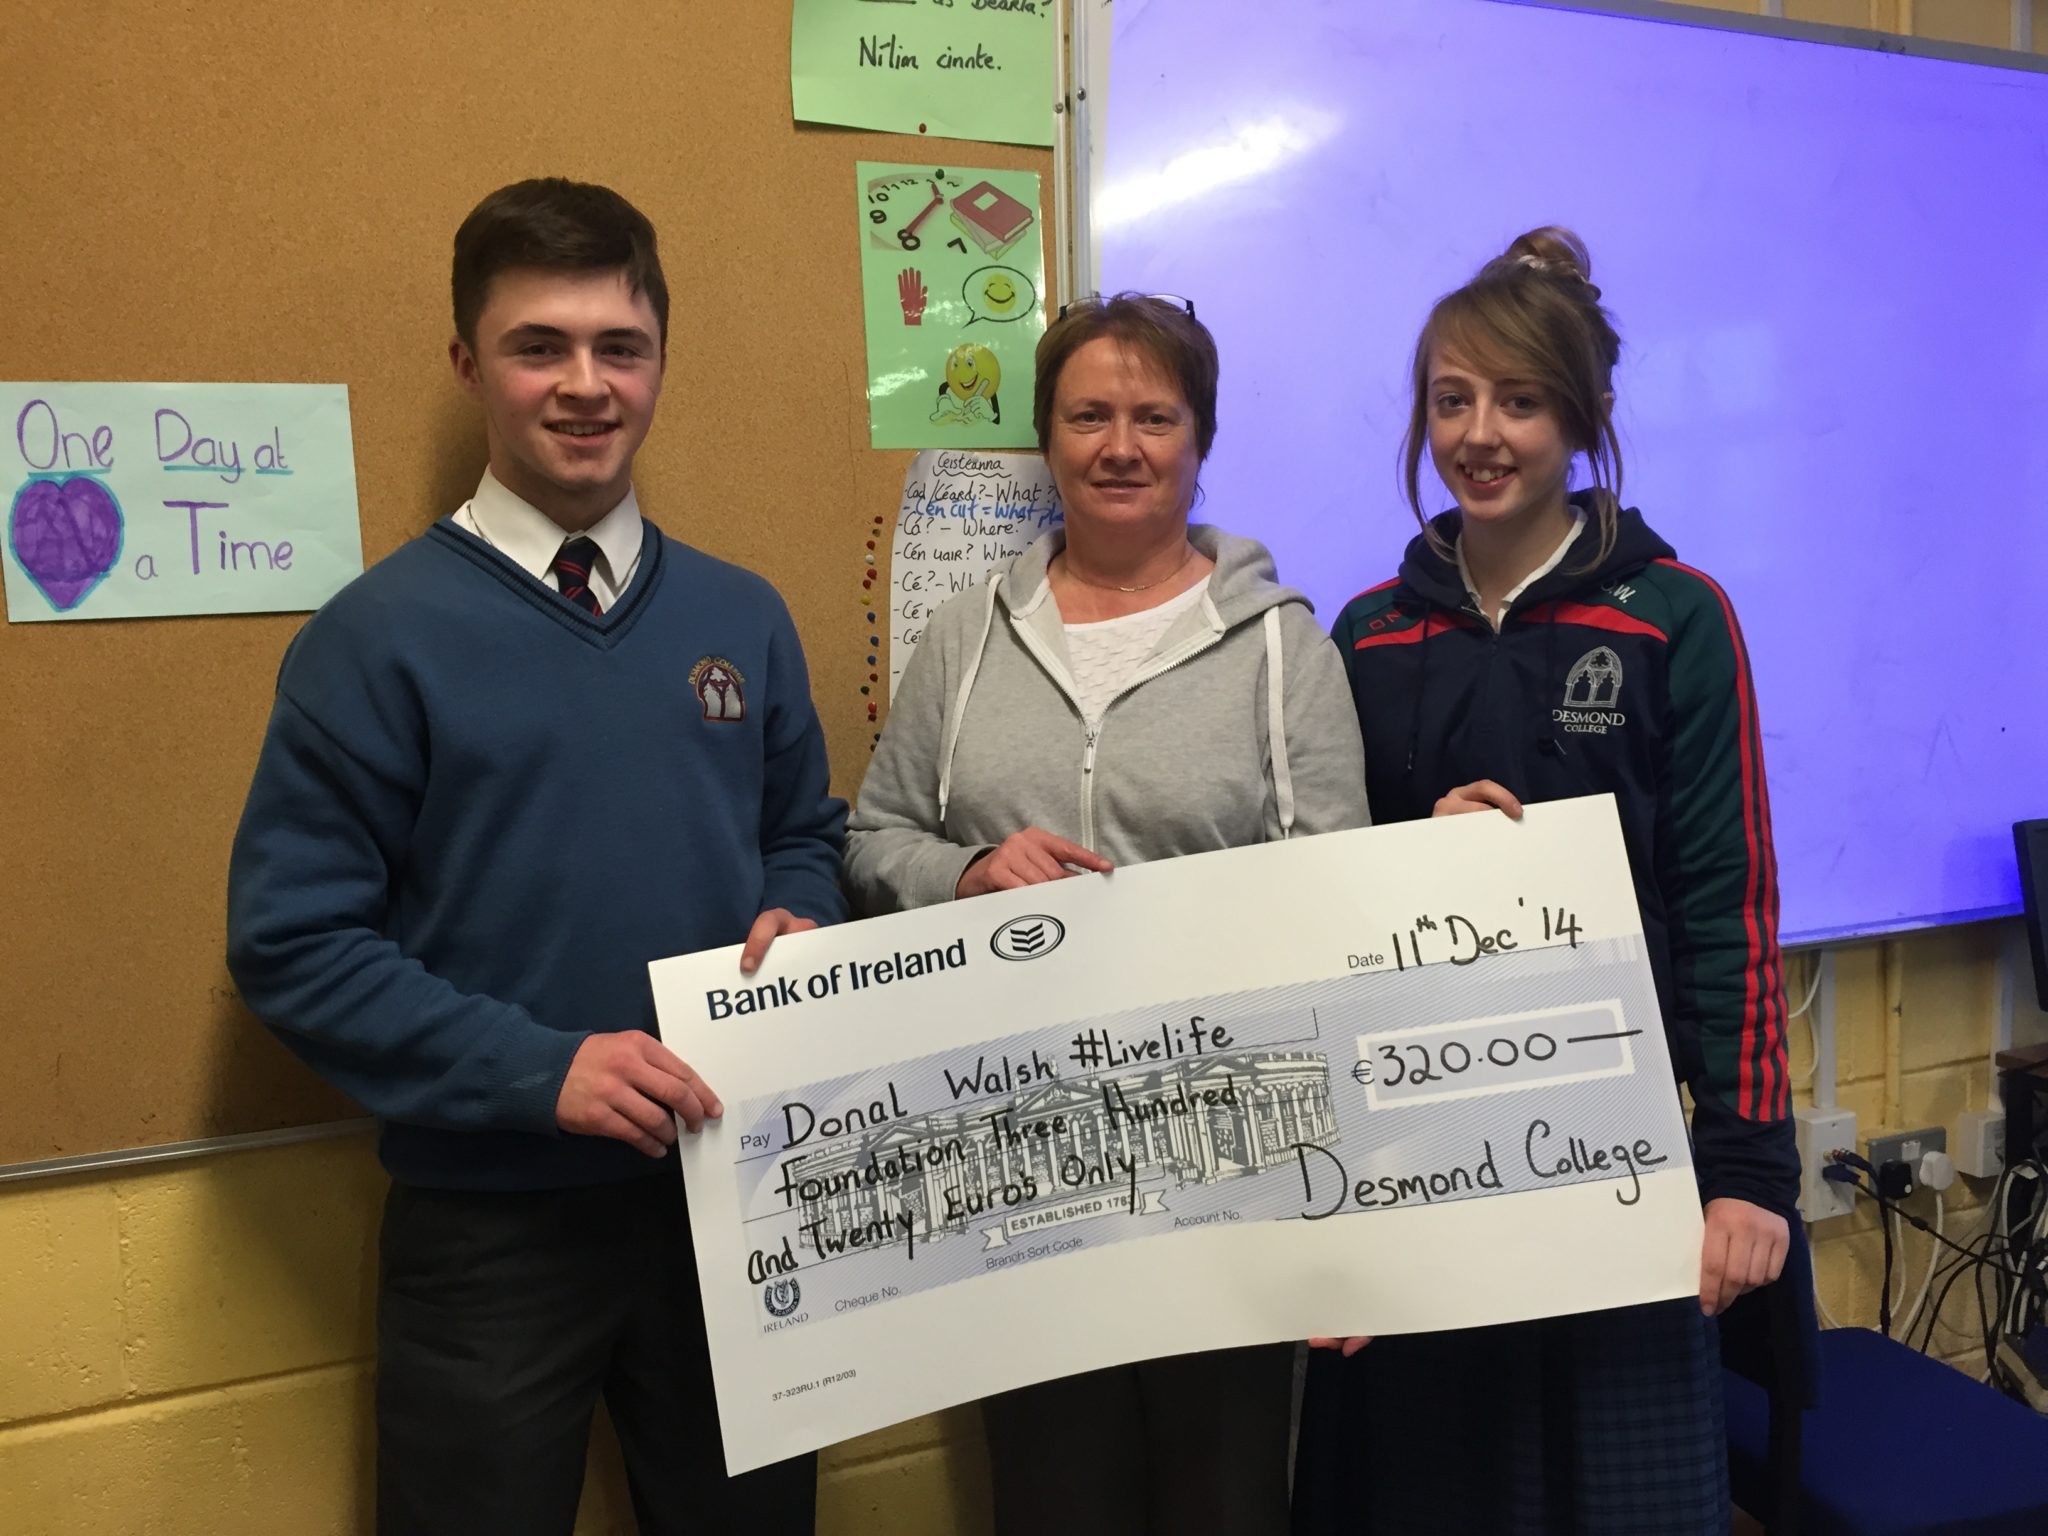 Elma Walsh of the #LiveLife Foundation gave a talk at Desmond College on 11th December 2014 where she was presented with a cheque for €320.00 that the Desmond College students raised